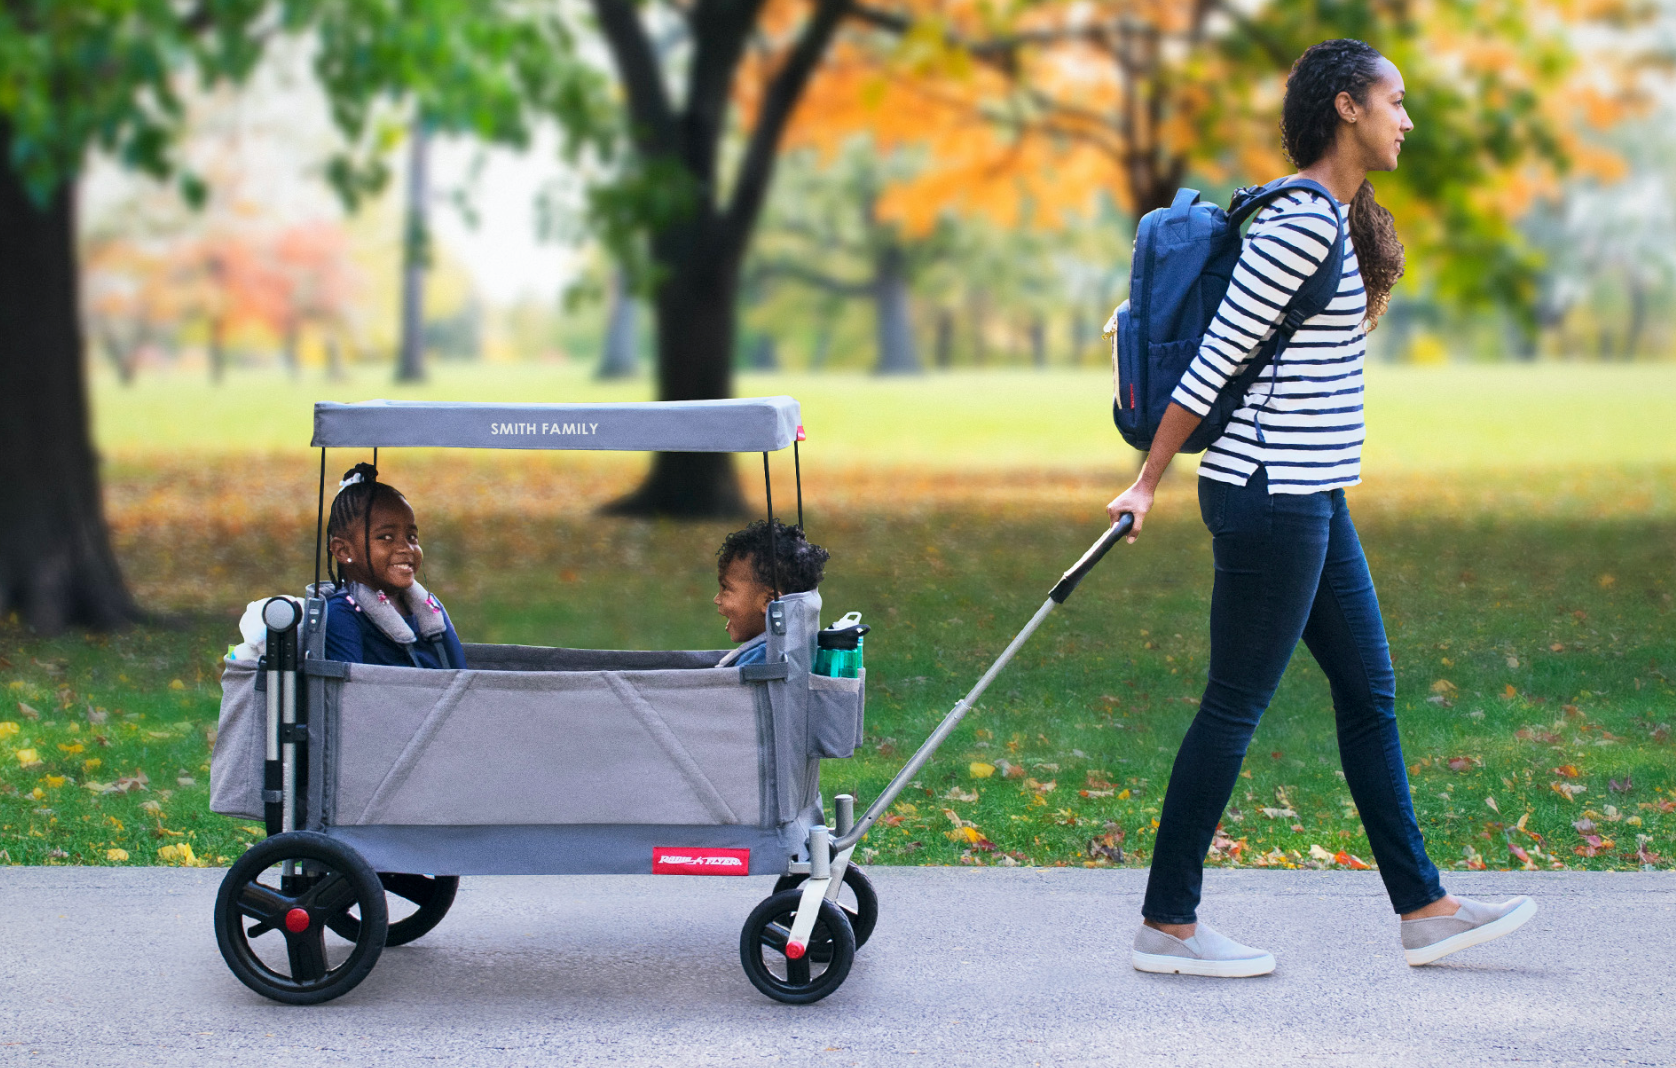 Our 2021 Radio Flyer Wagon with Canopy Review